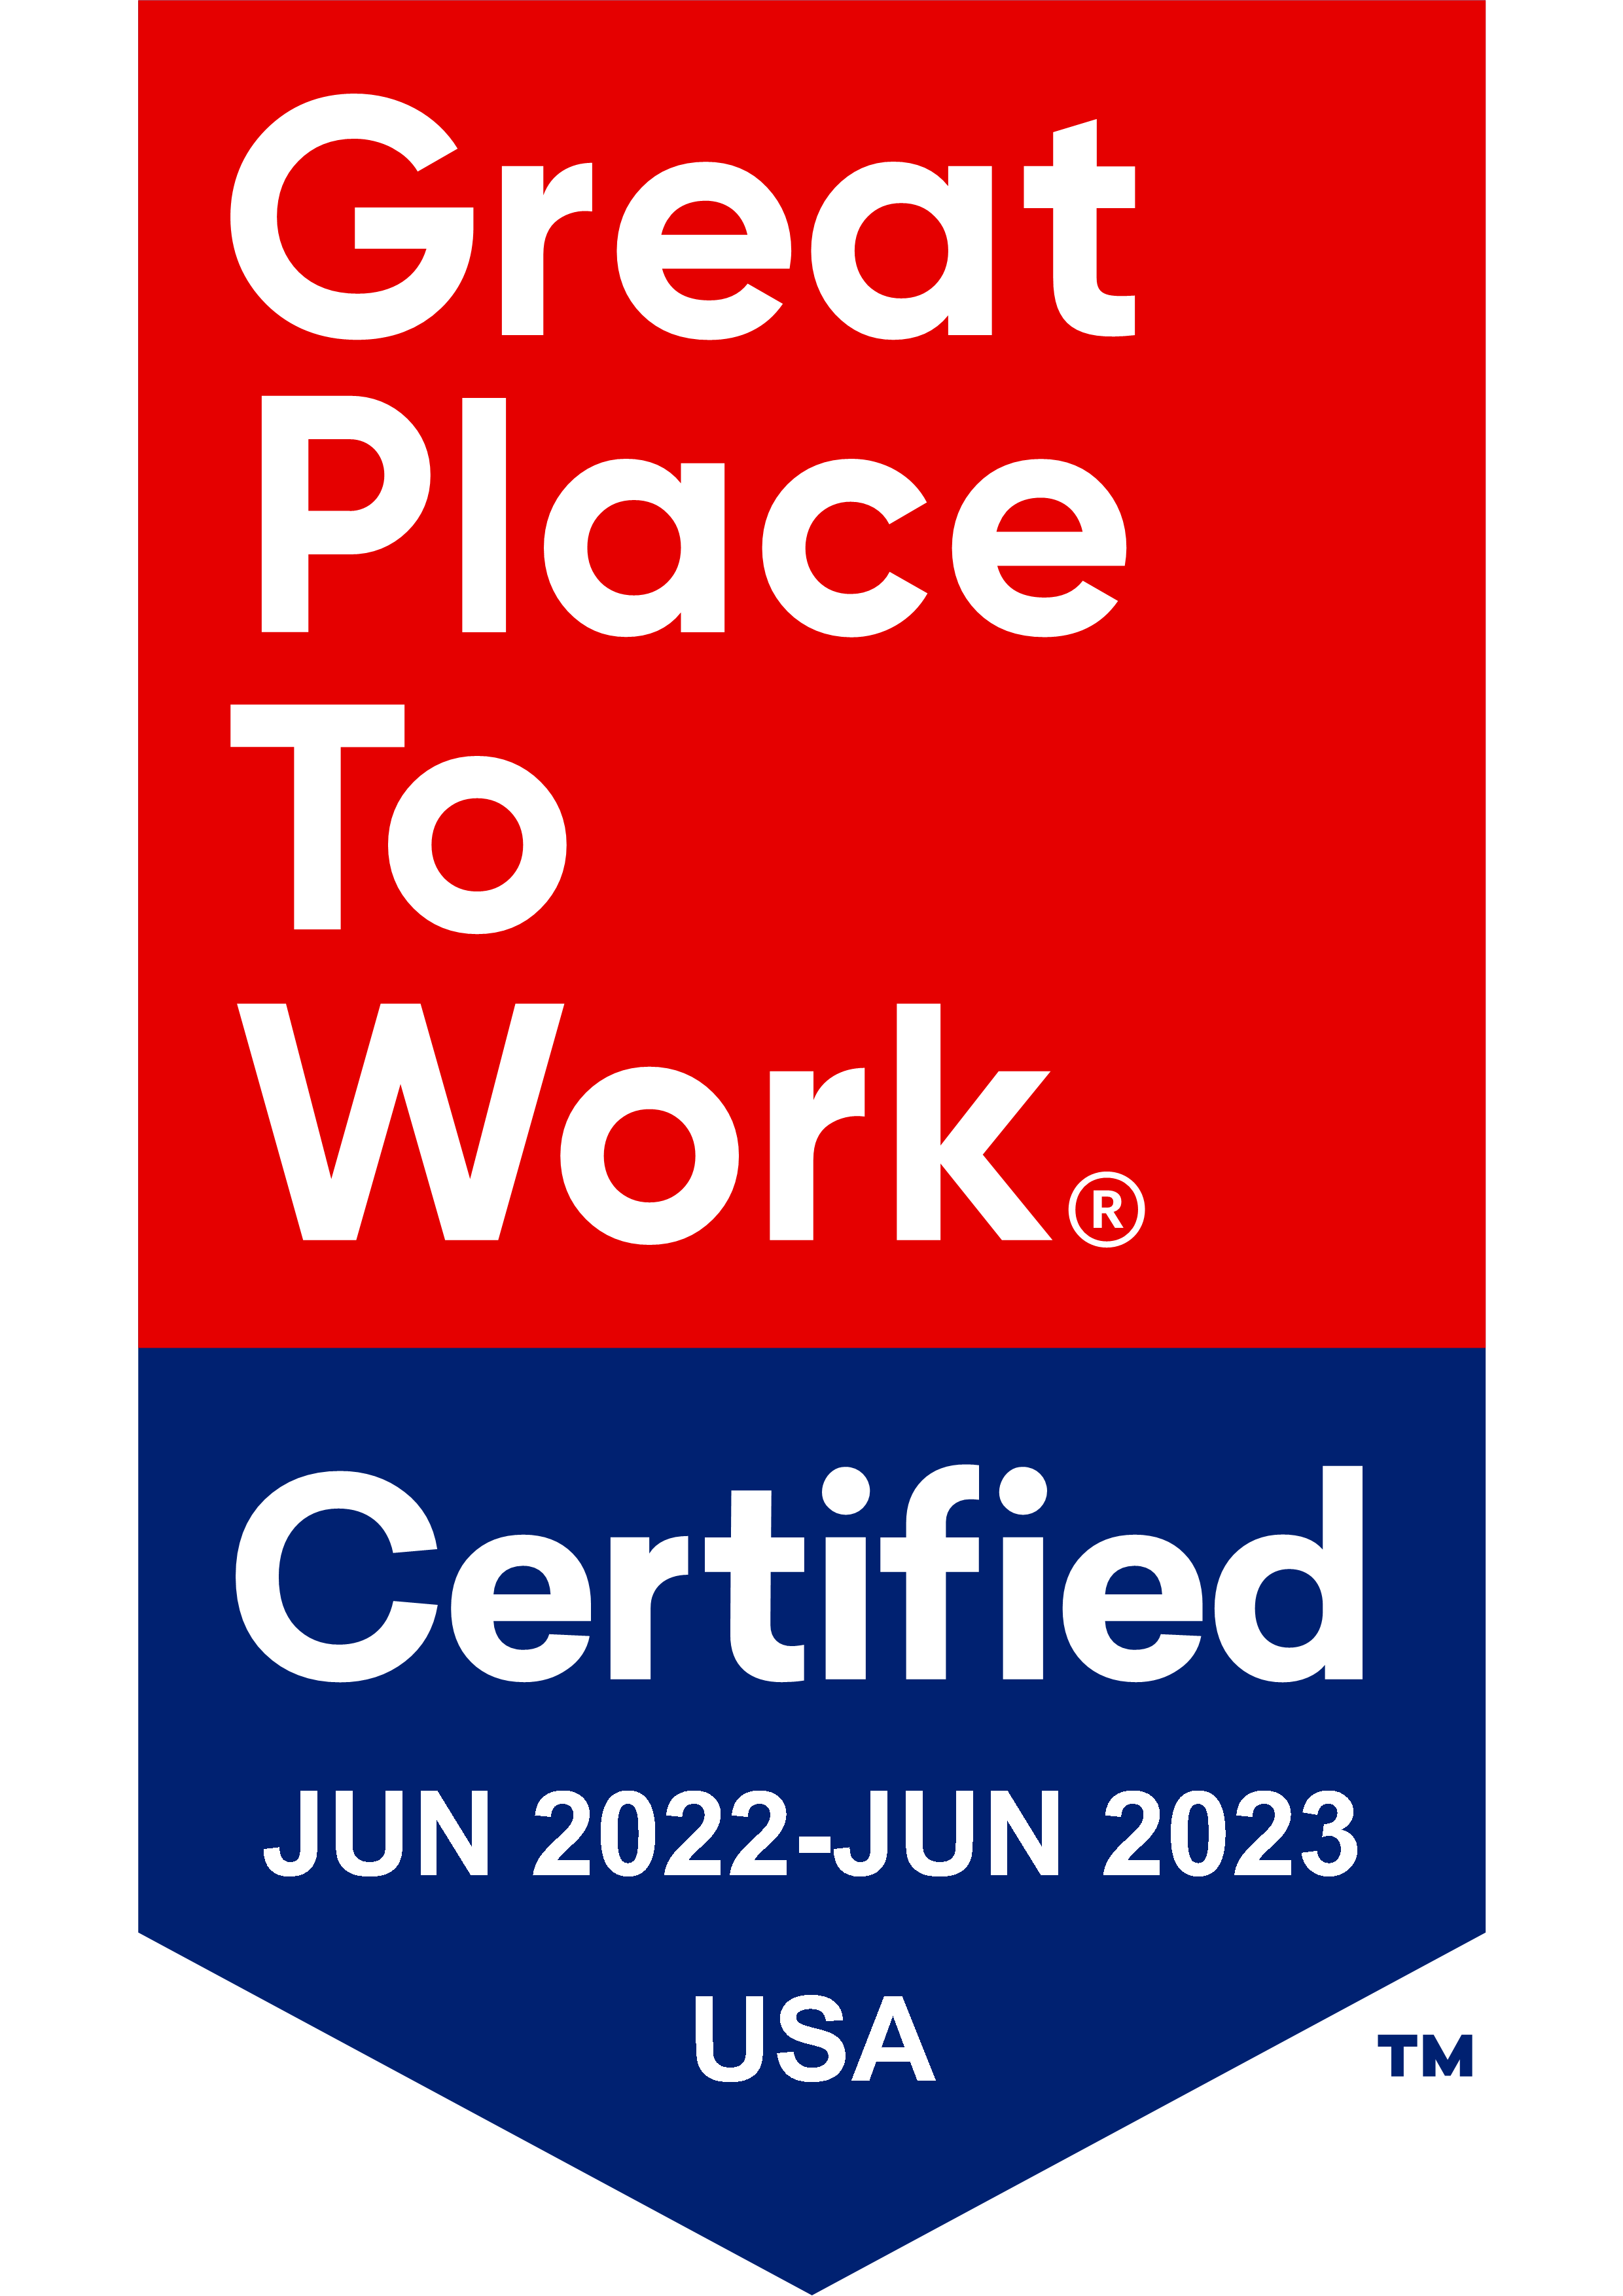 Great Place to Work Certified June 2022 - June 2023 USA